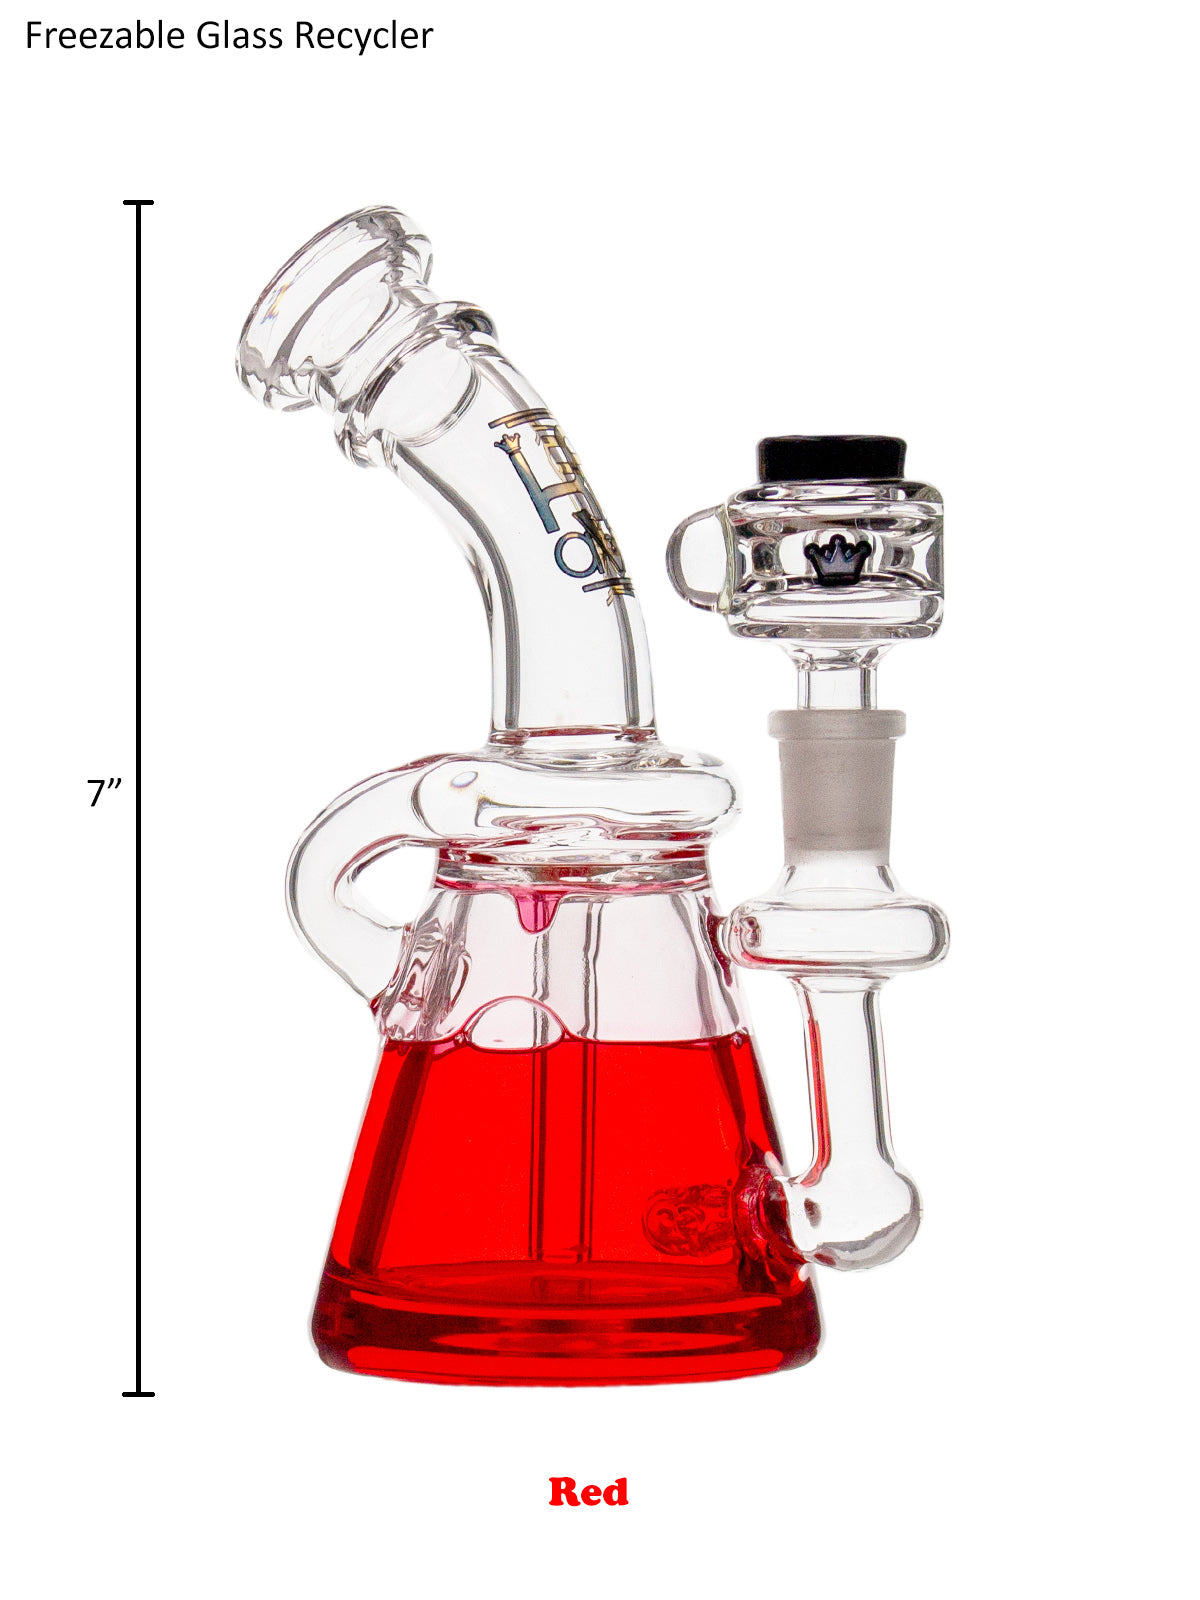 Krave Glass FreezeCYCLER BH * FREE GRINDER*